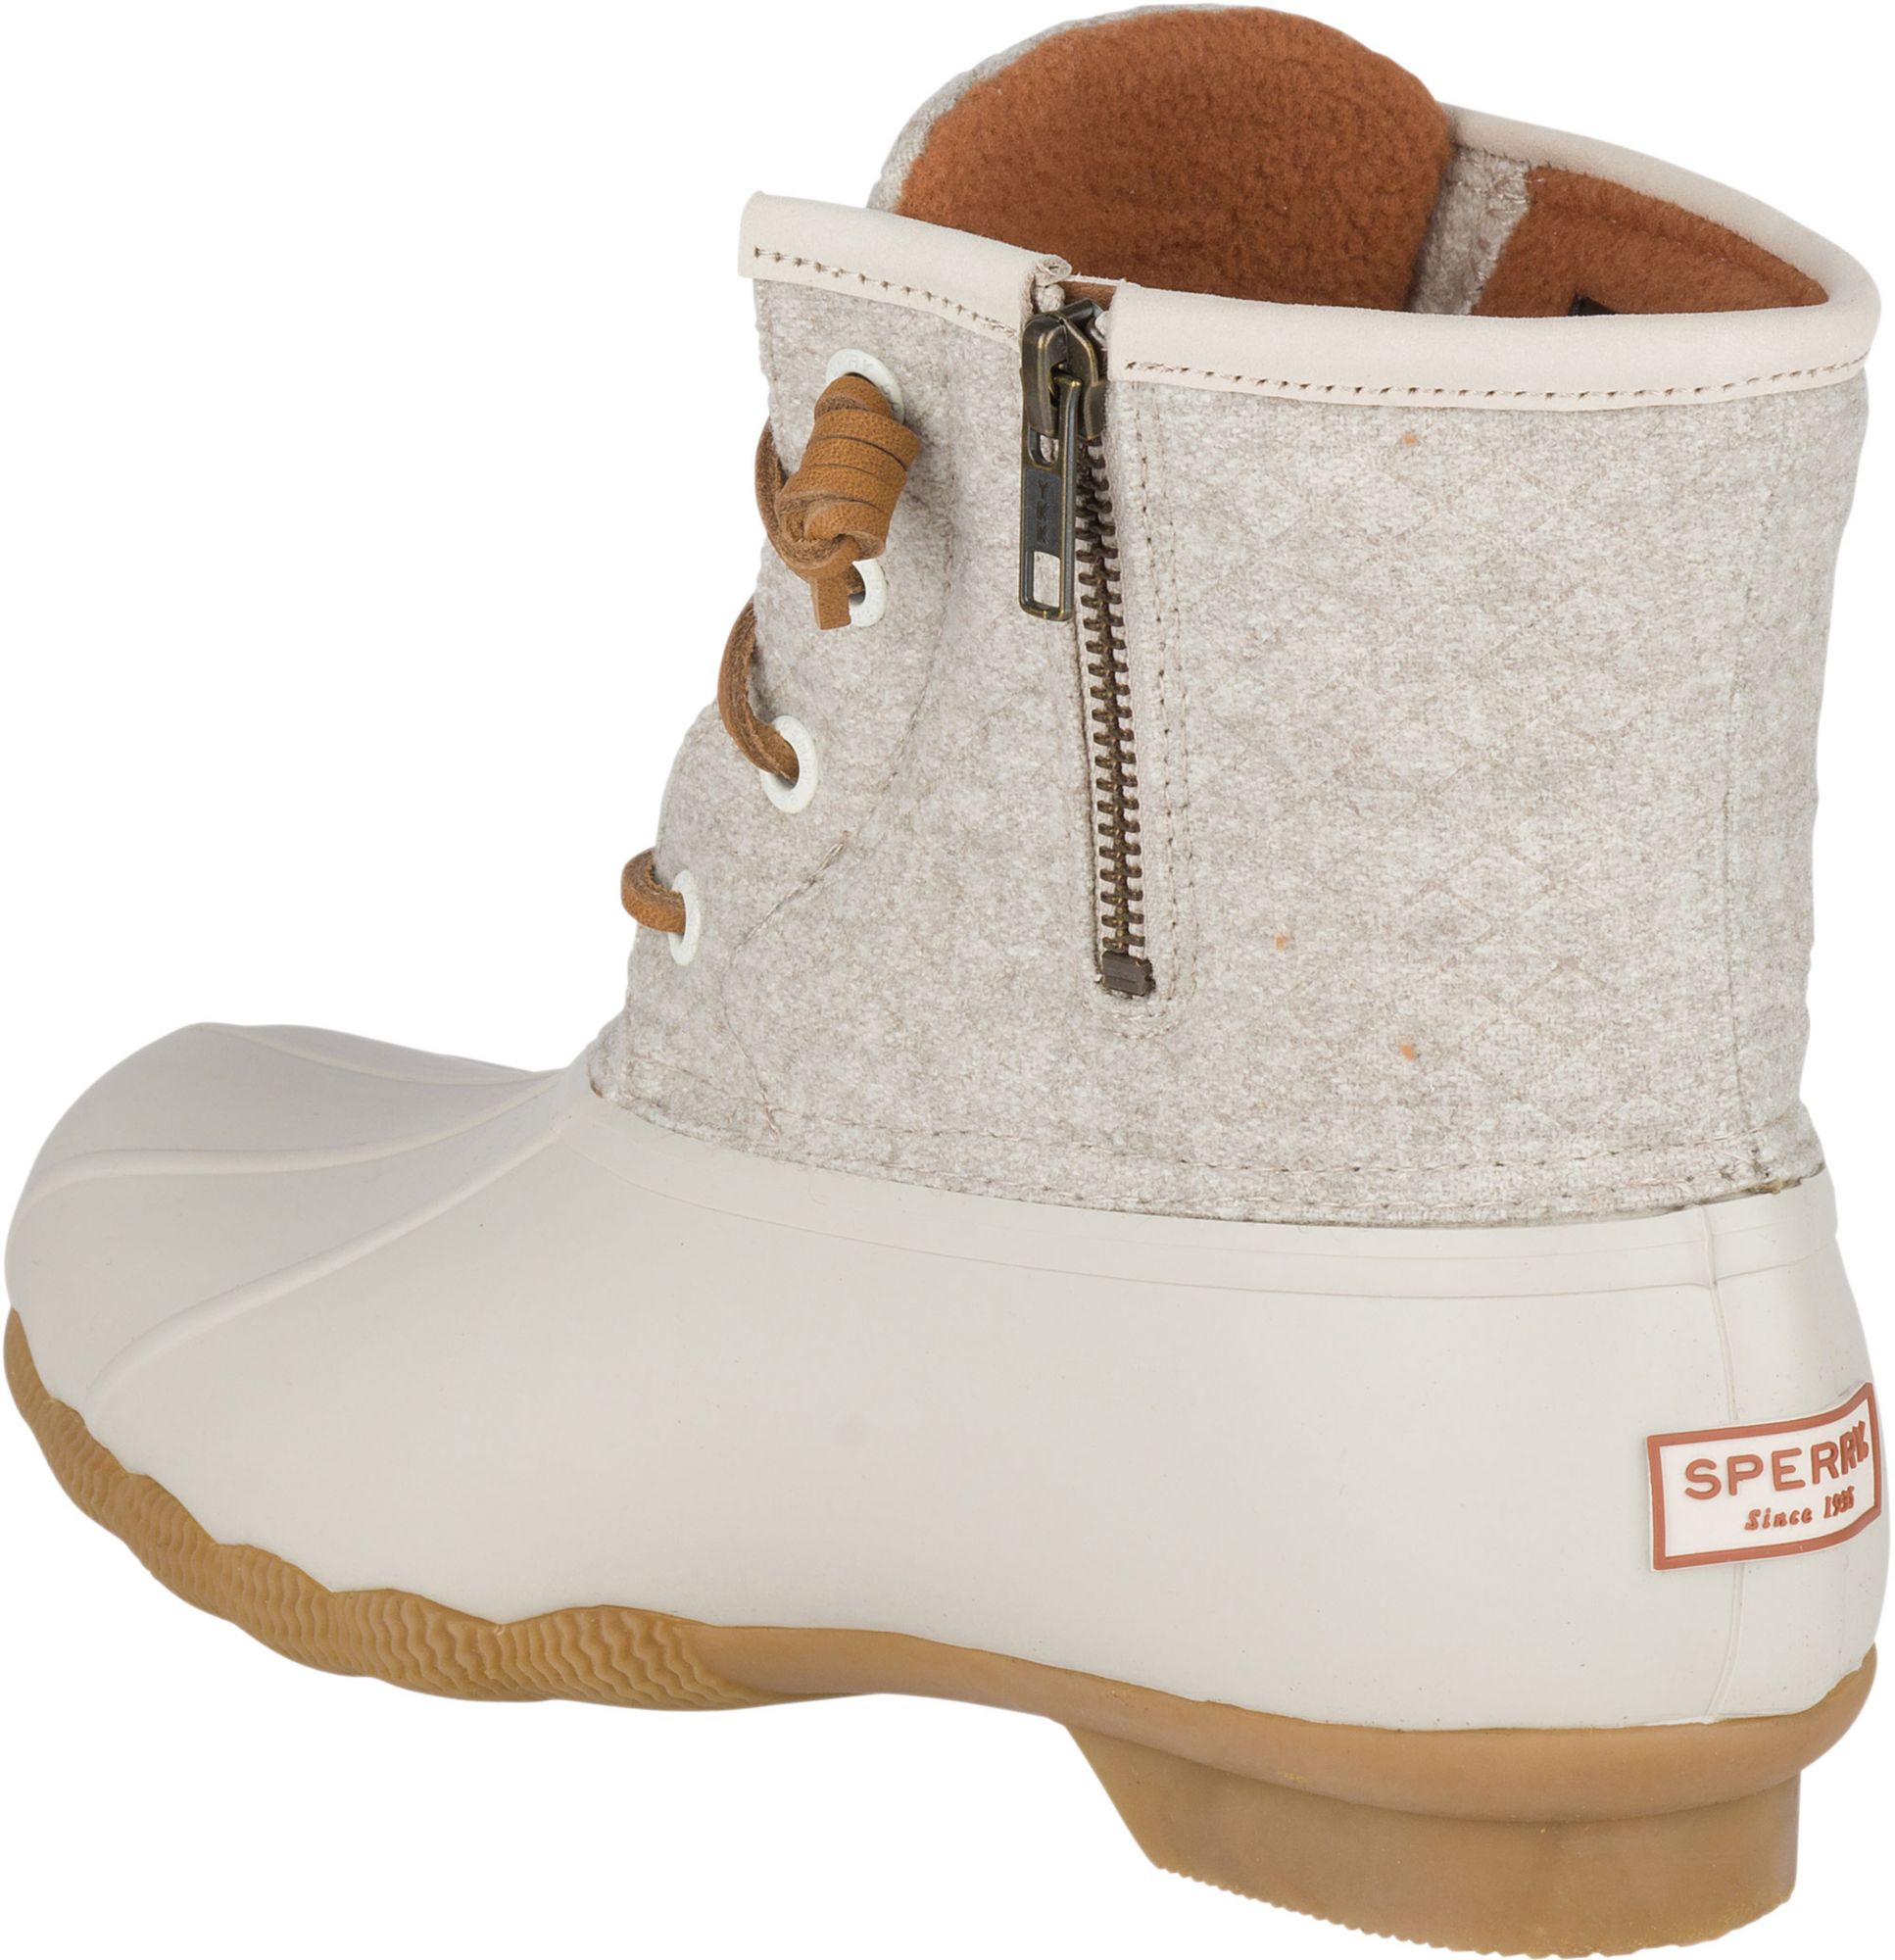 women's saltwater wool embossed duck boot with thinsulate